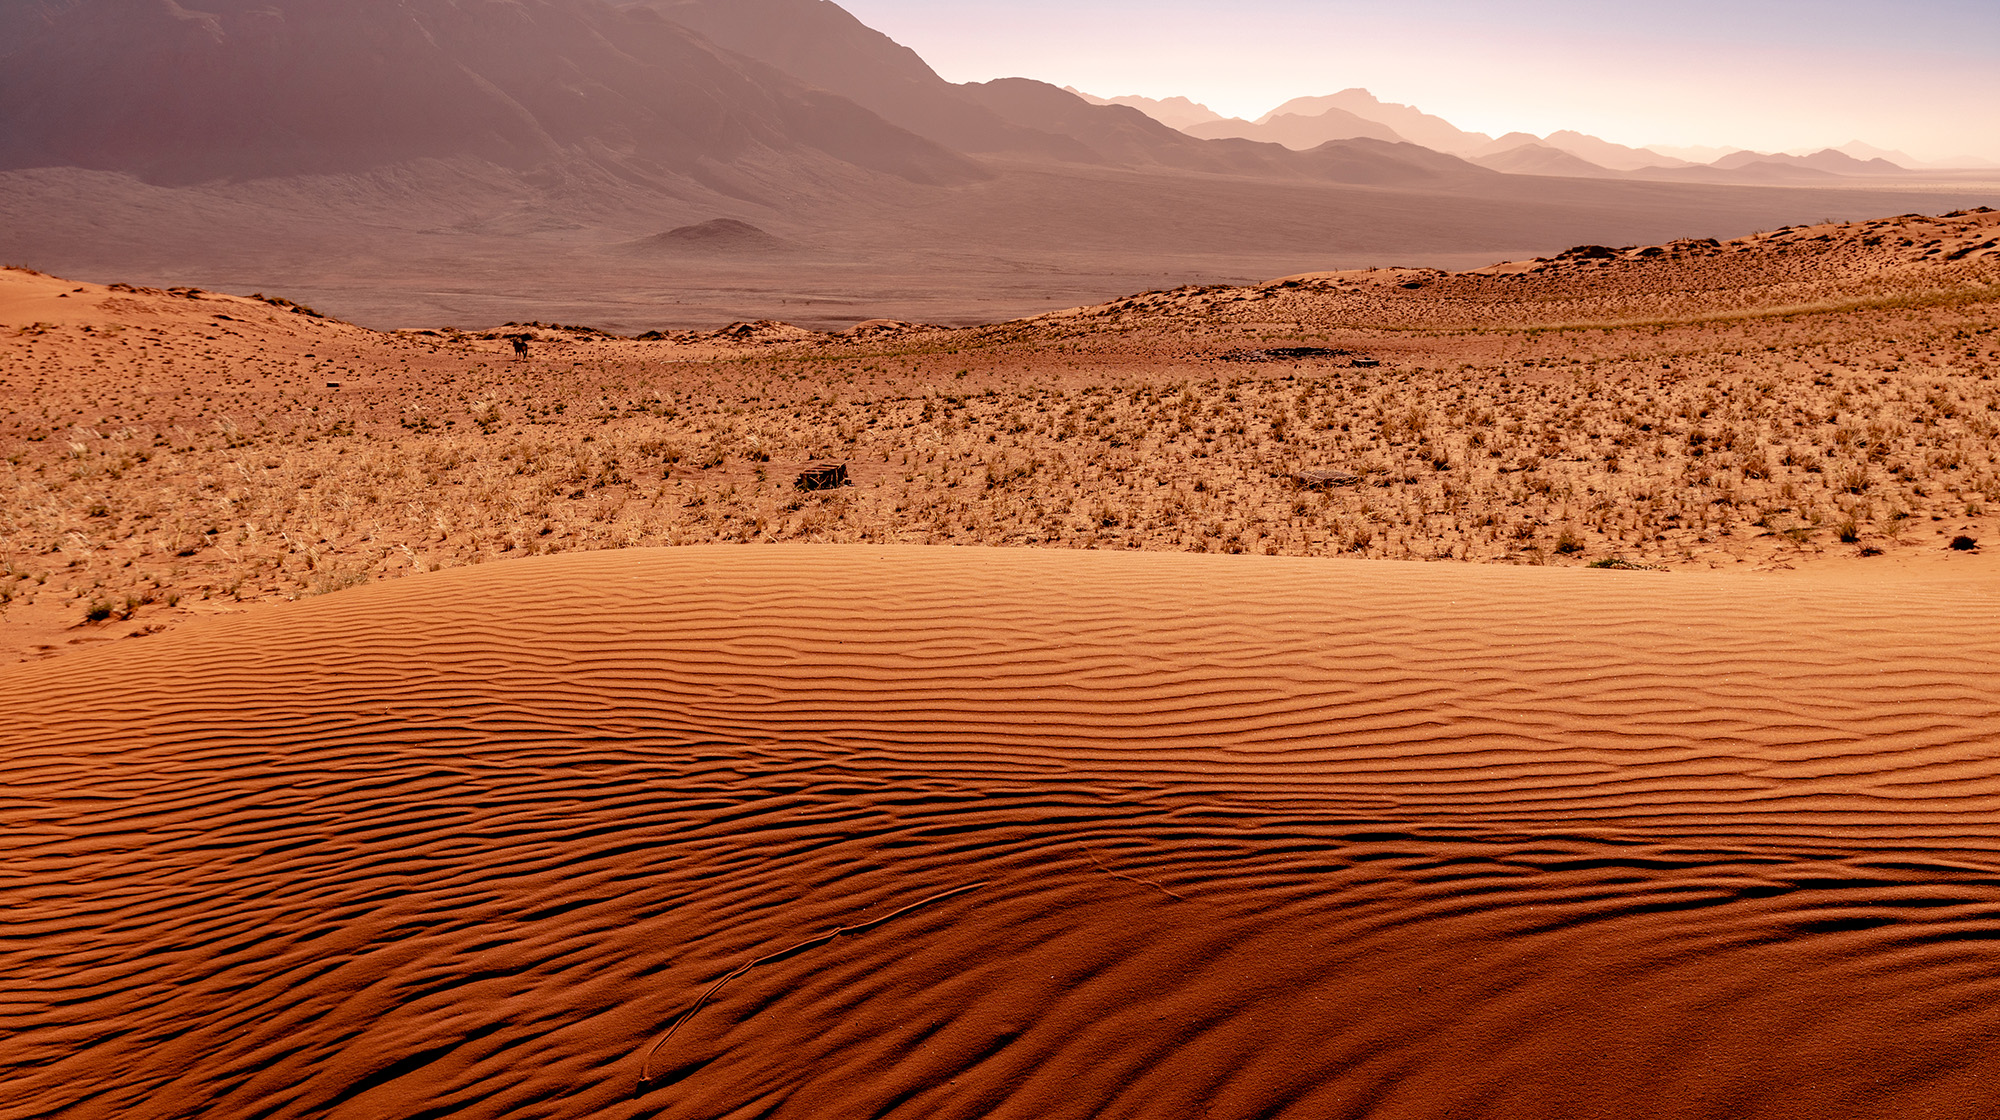 Desert Lodge - Wolwedans - Namibia - red dunes and mountains